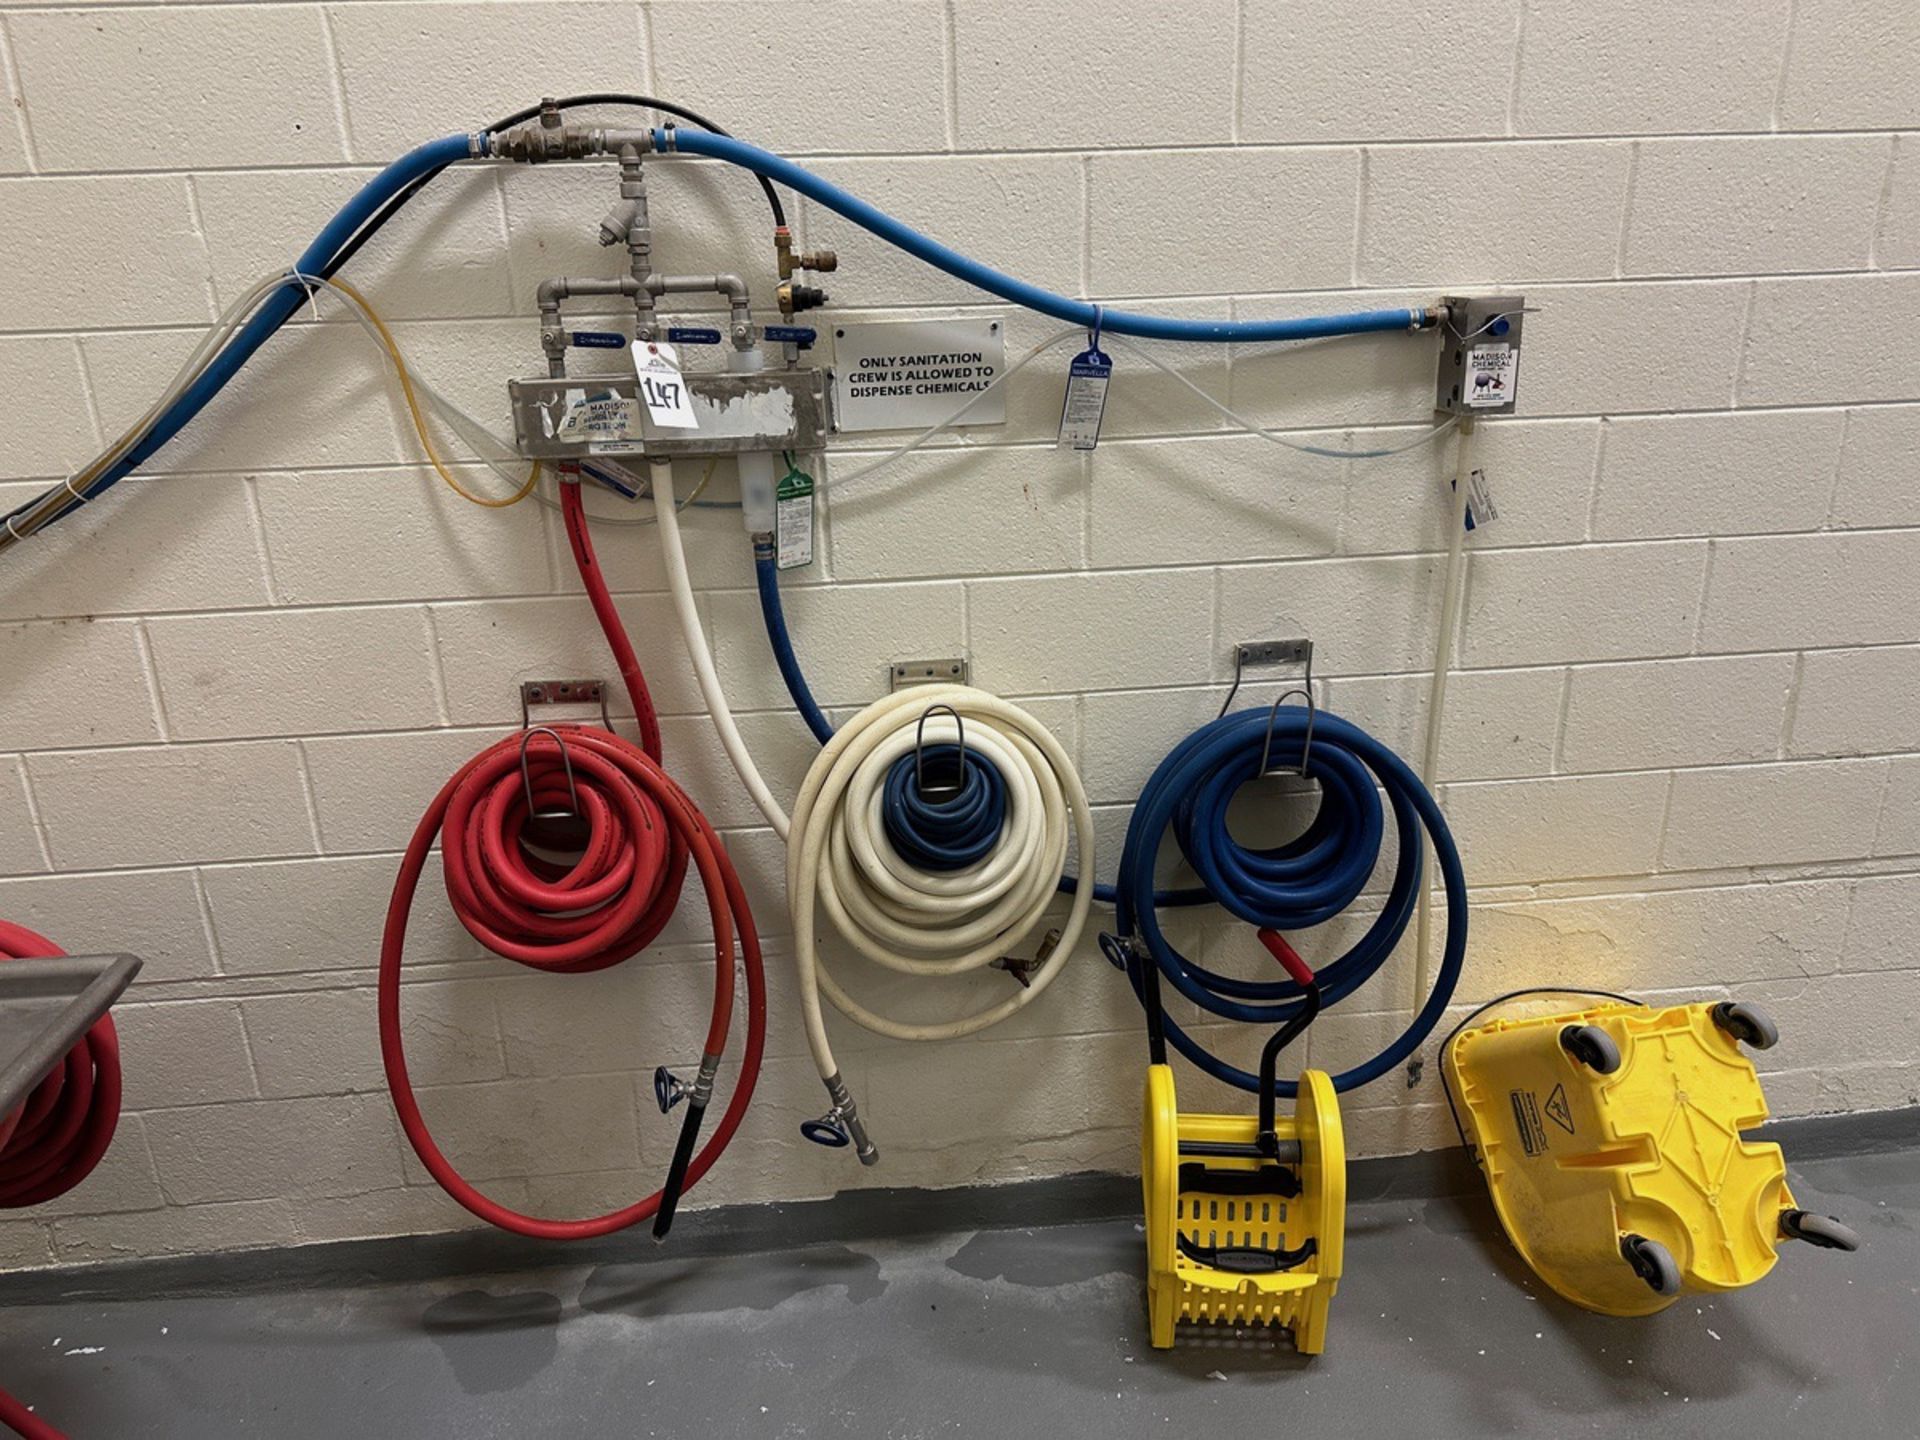 Lot of Chemical Foamers and Heavy Duty Hoses